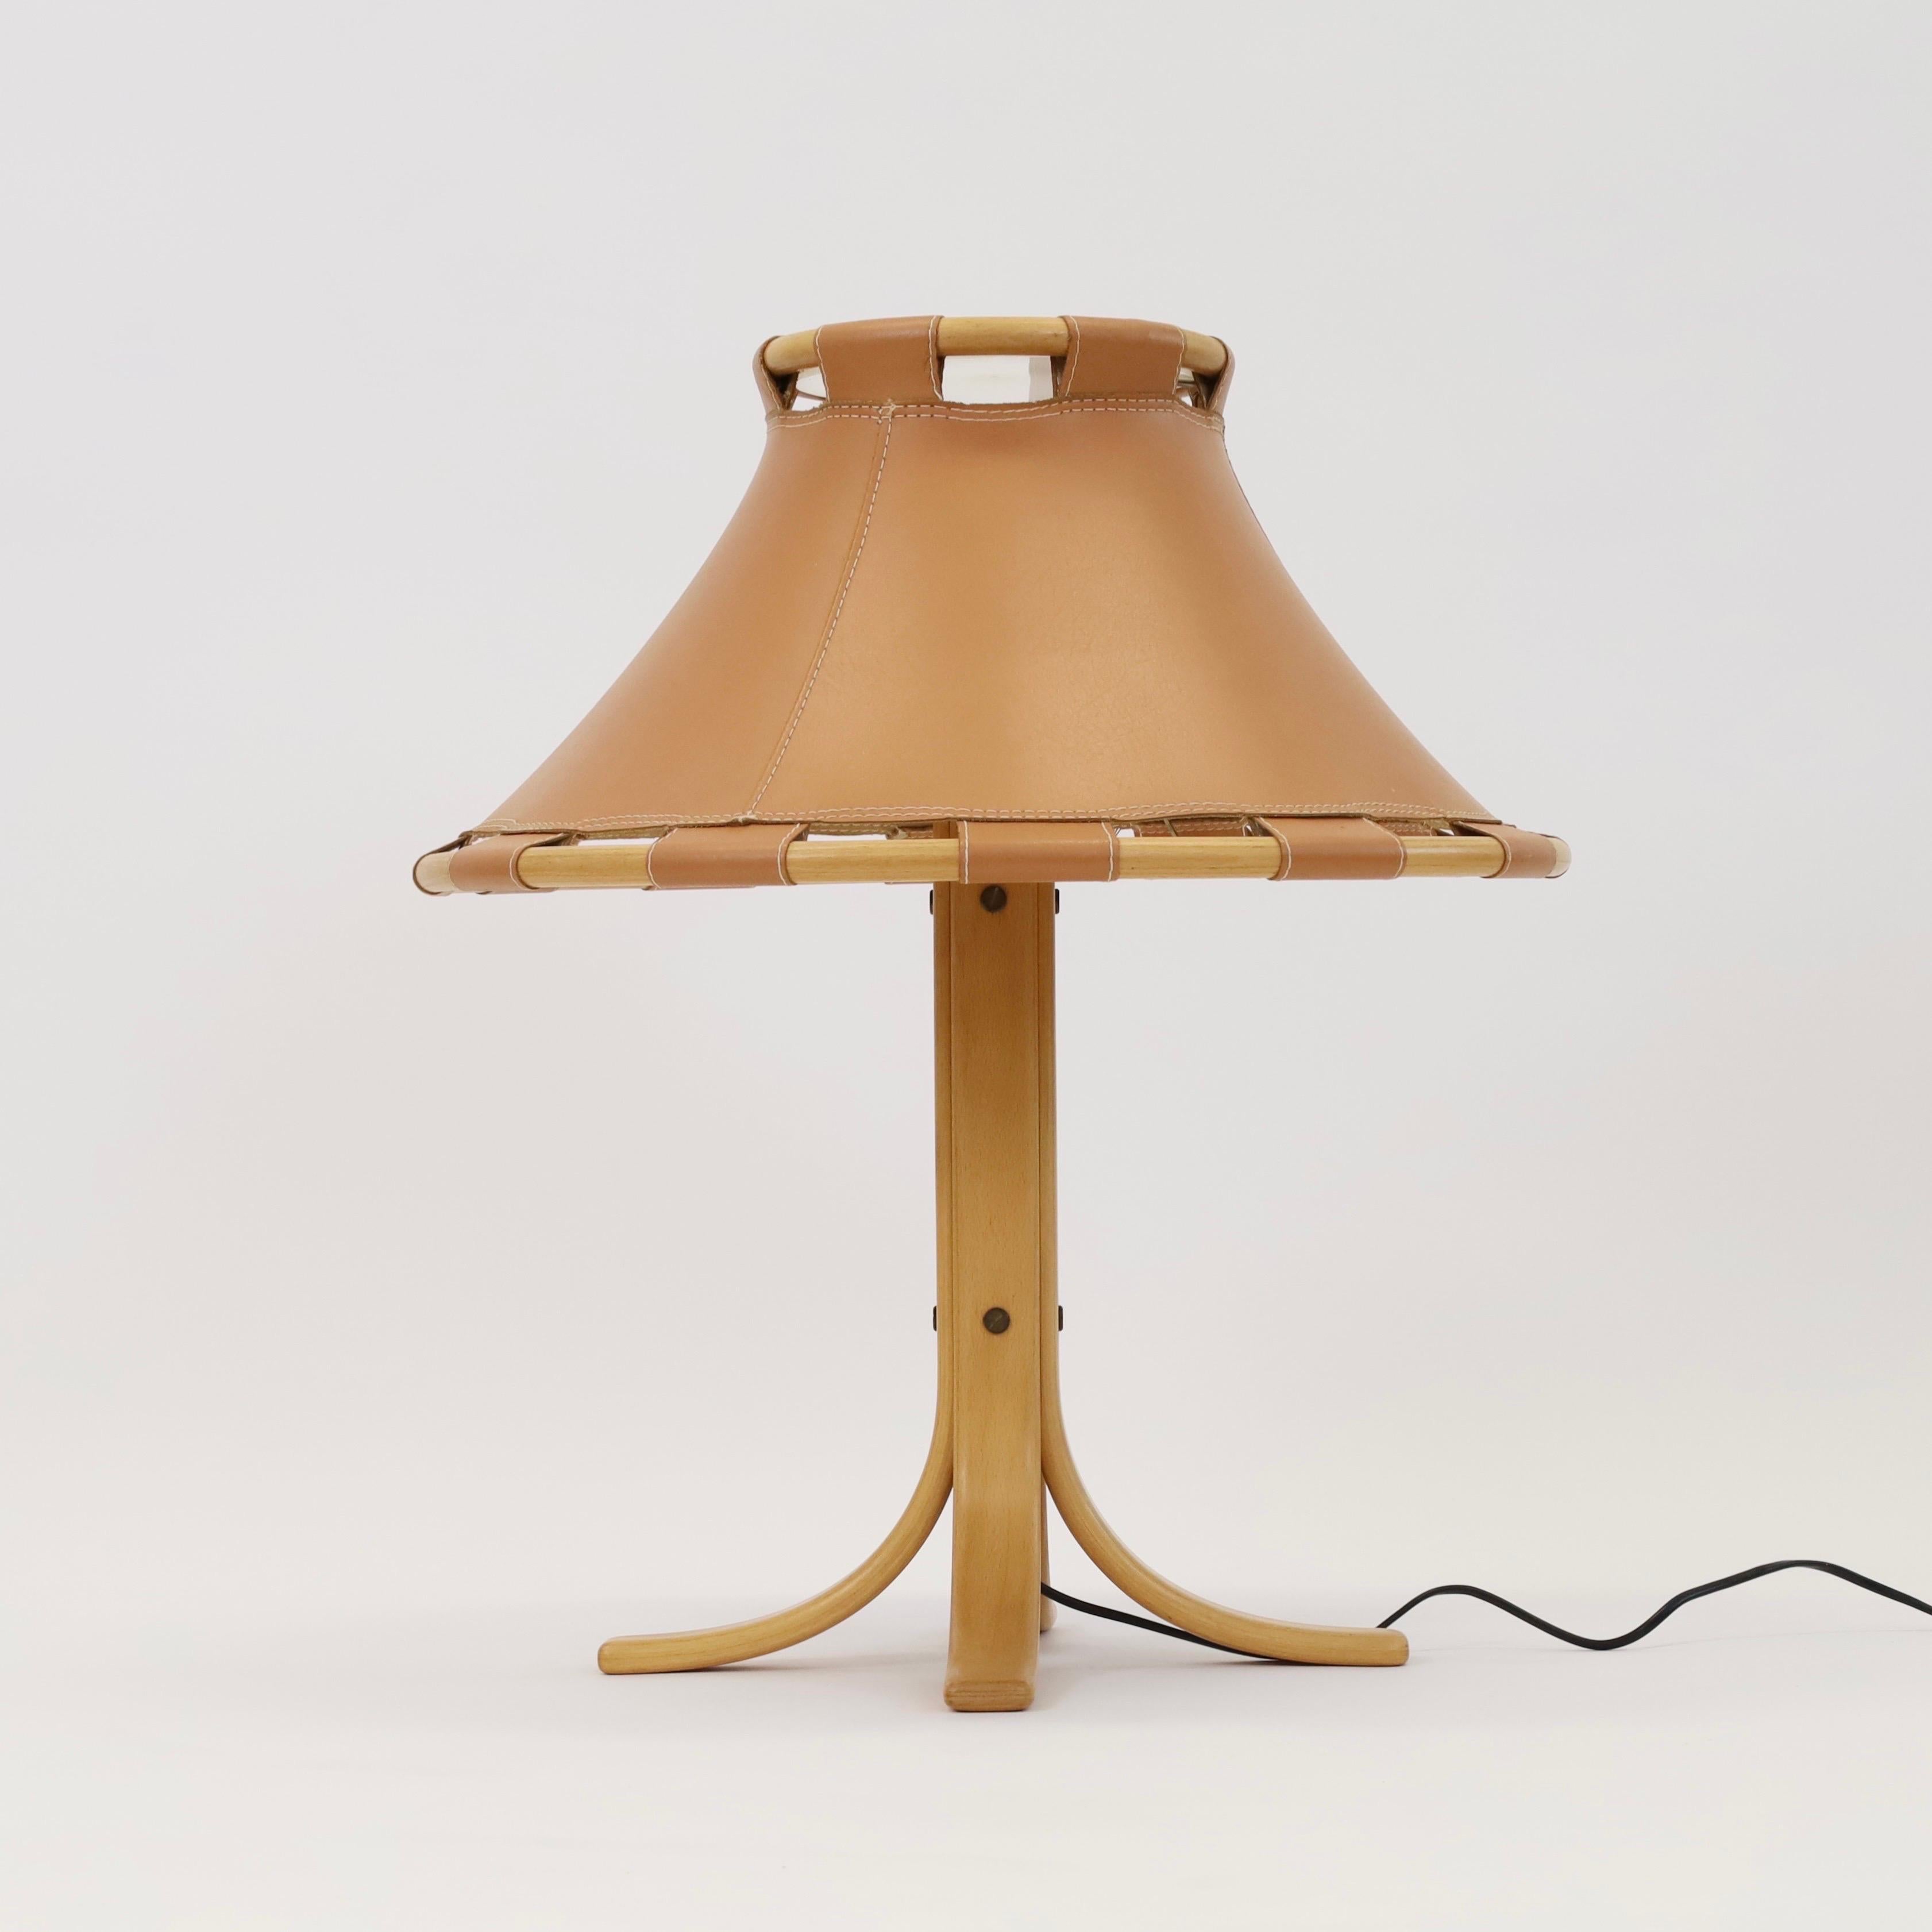 Beech wood and leather Desk Lamp by Anna Ehrner for Atelje Lyktan, 1970s, Sweden For Sale 6